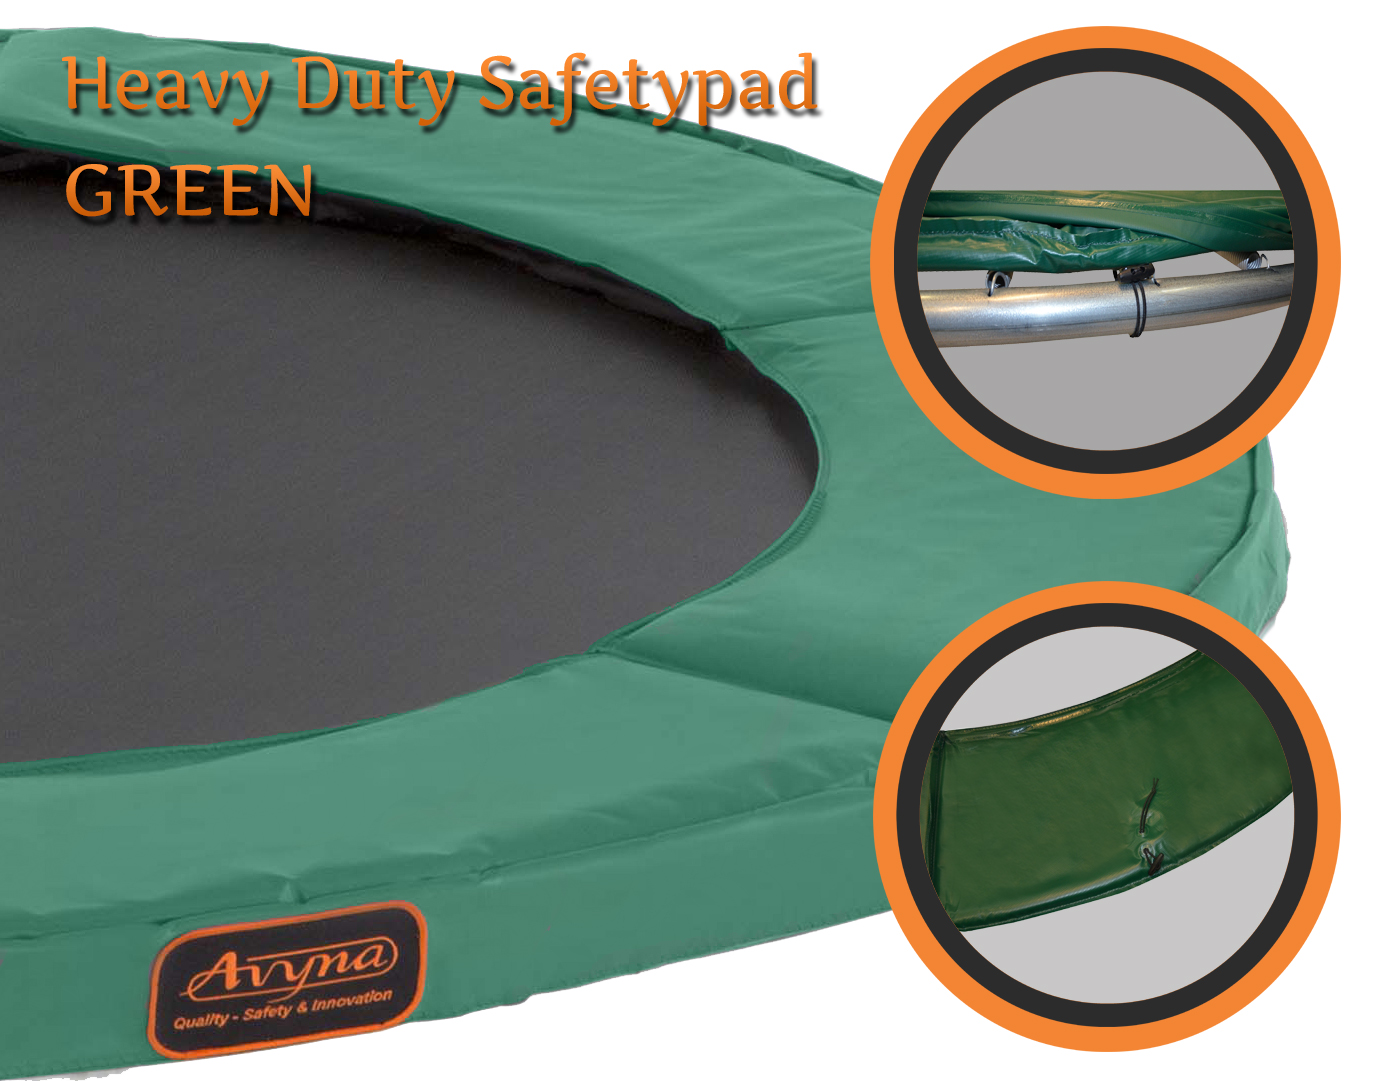 Universal Safety Pad 10ft Heavy Duty Green